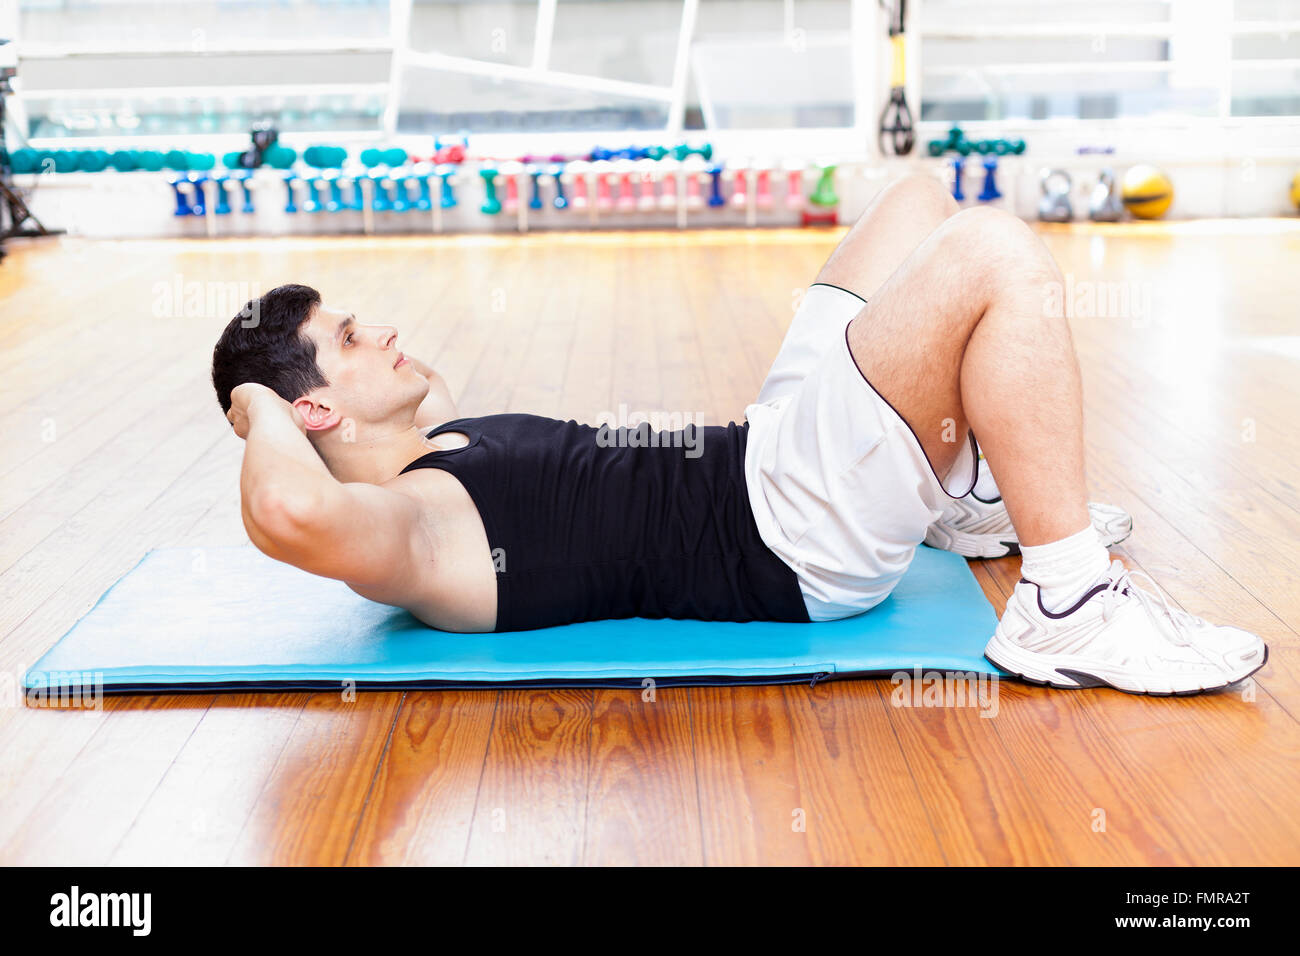 Handsome man exercising abdominal muscles at the gym Stock Photo